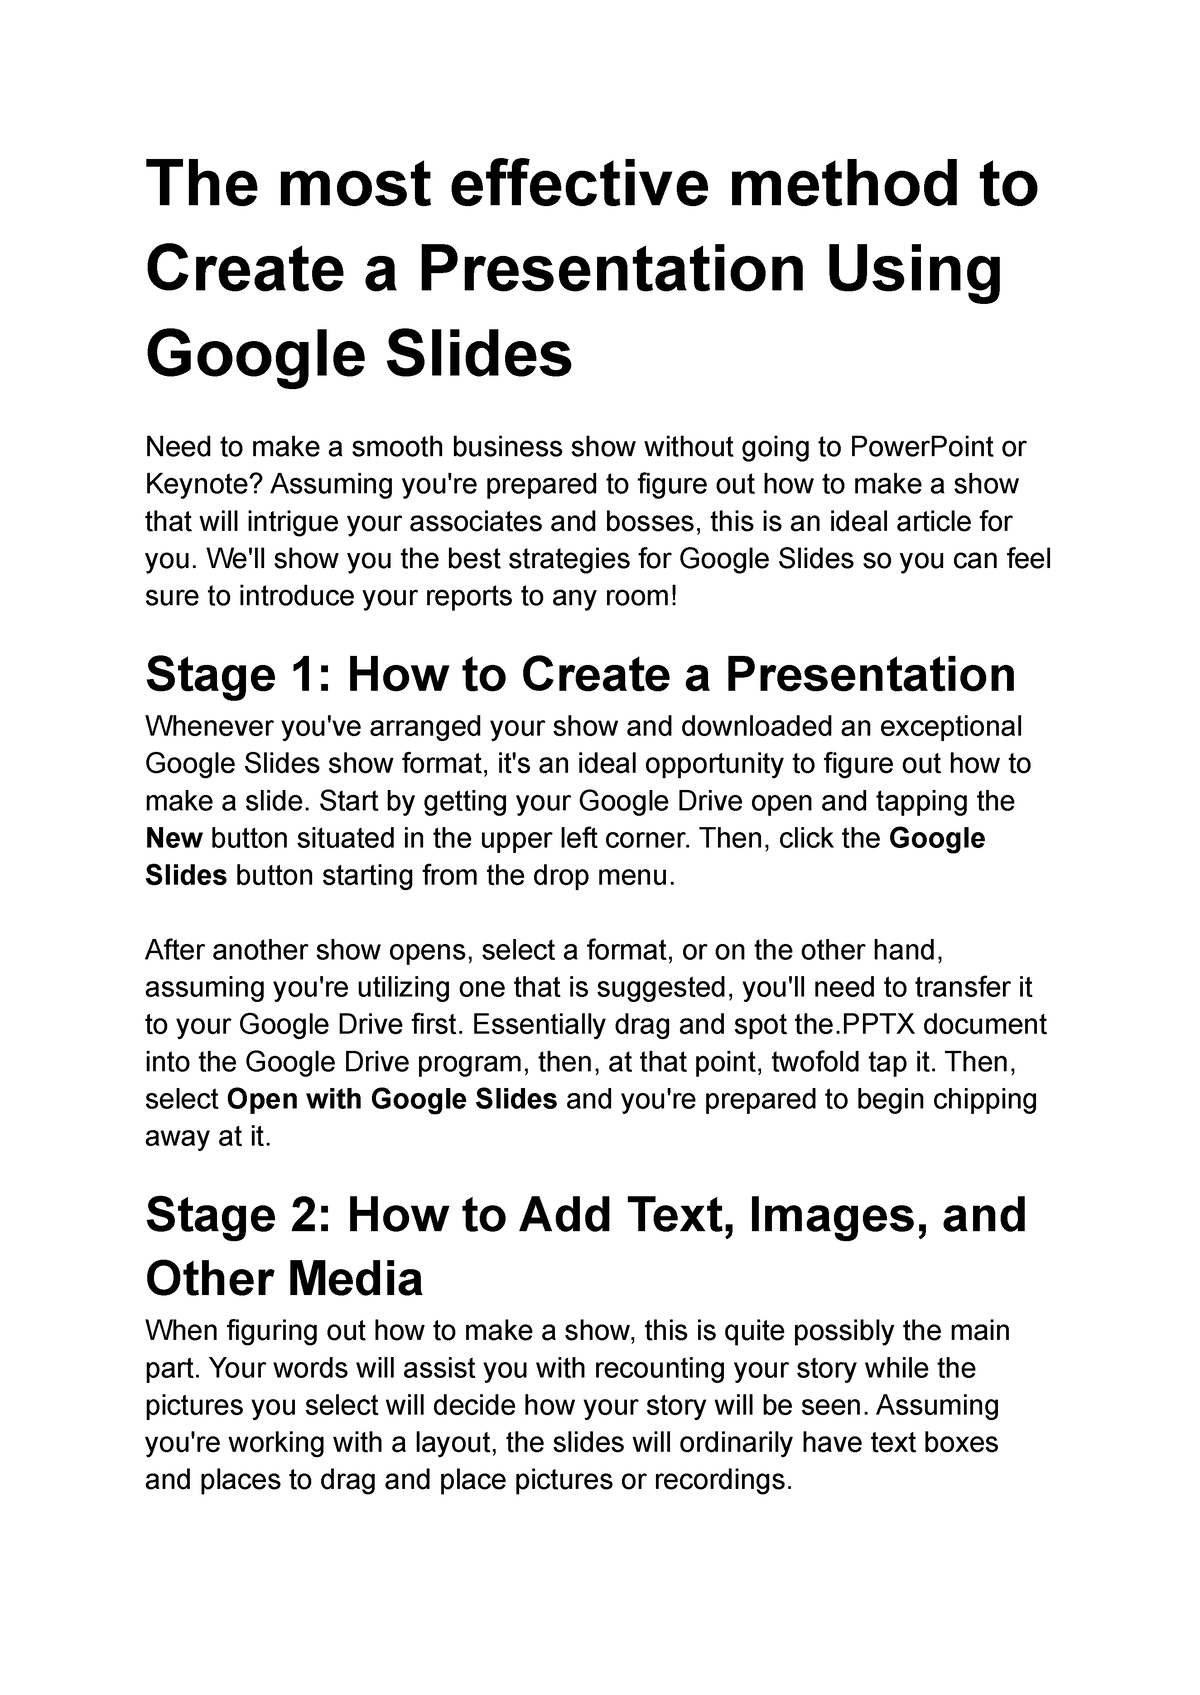 best-way-to-create-a-presentation-using-google-slides-the-most